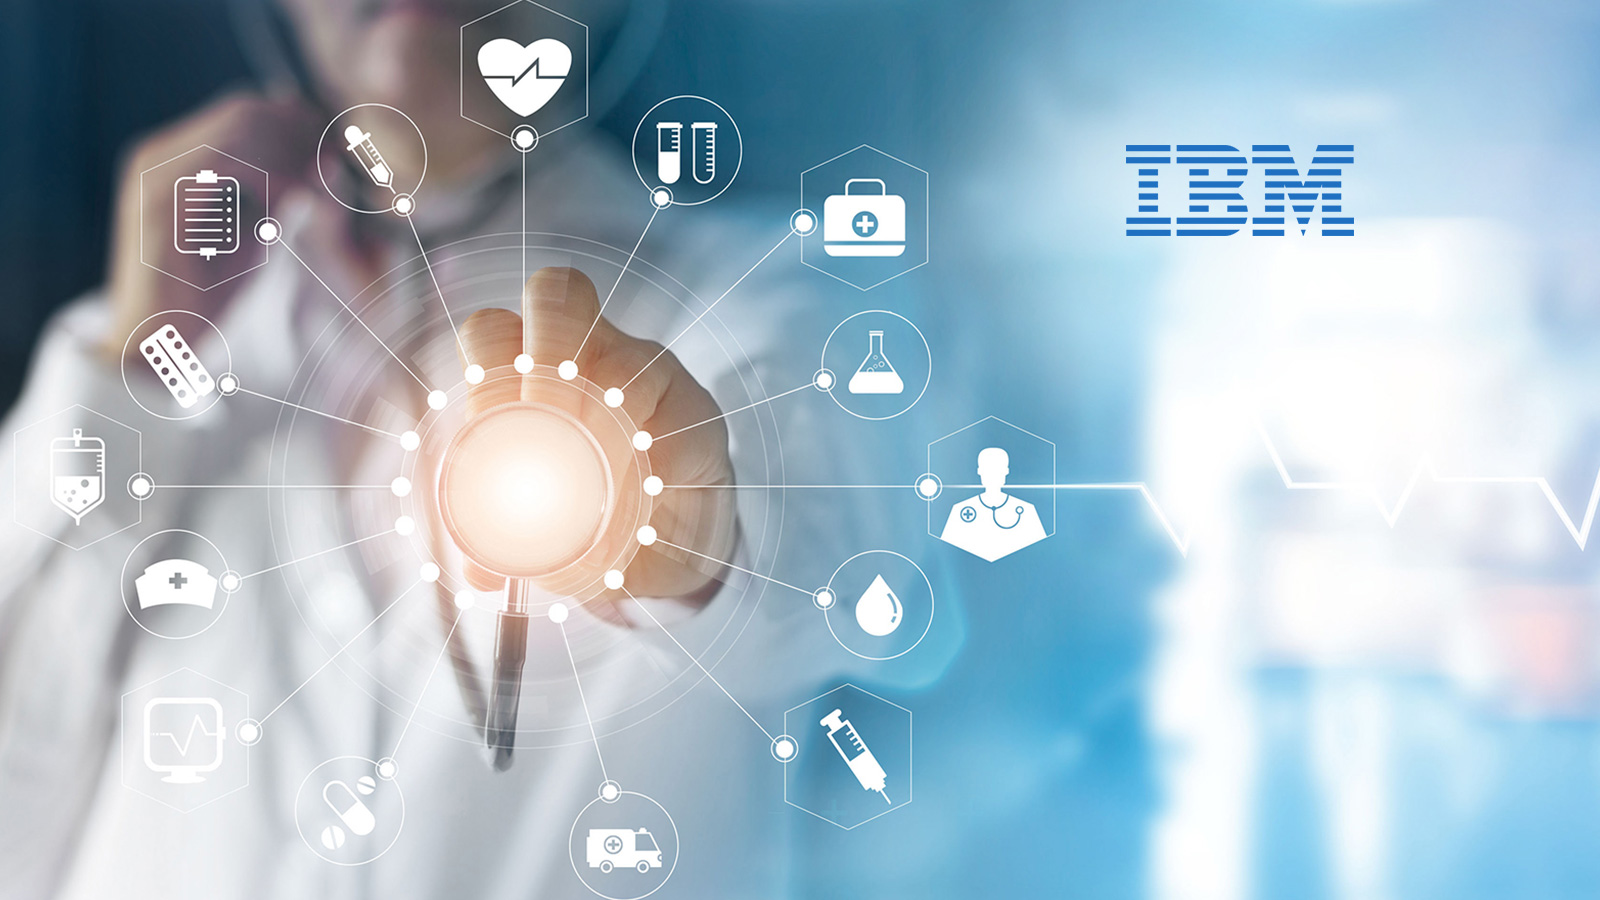 Ibm Watson Health Names Nation's Top Health Systems - Ibm , HD Wallpaper & Backgrounds